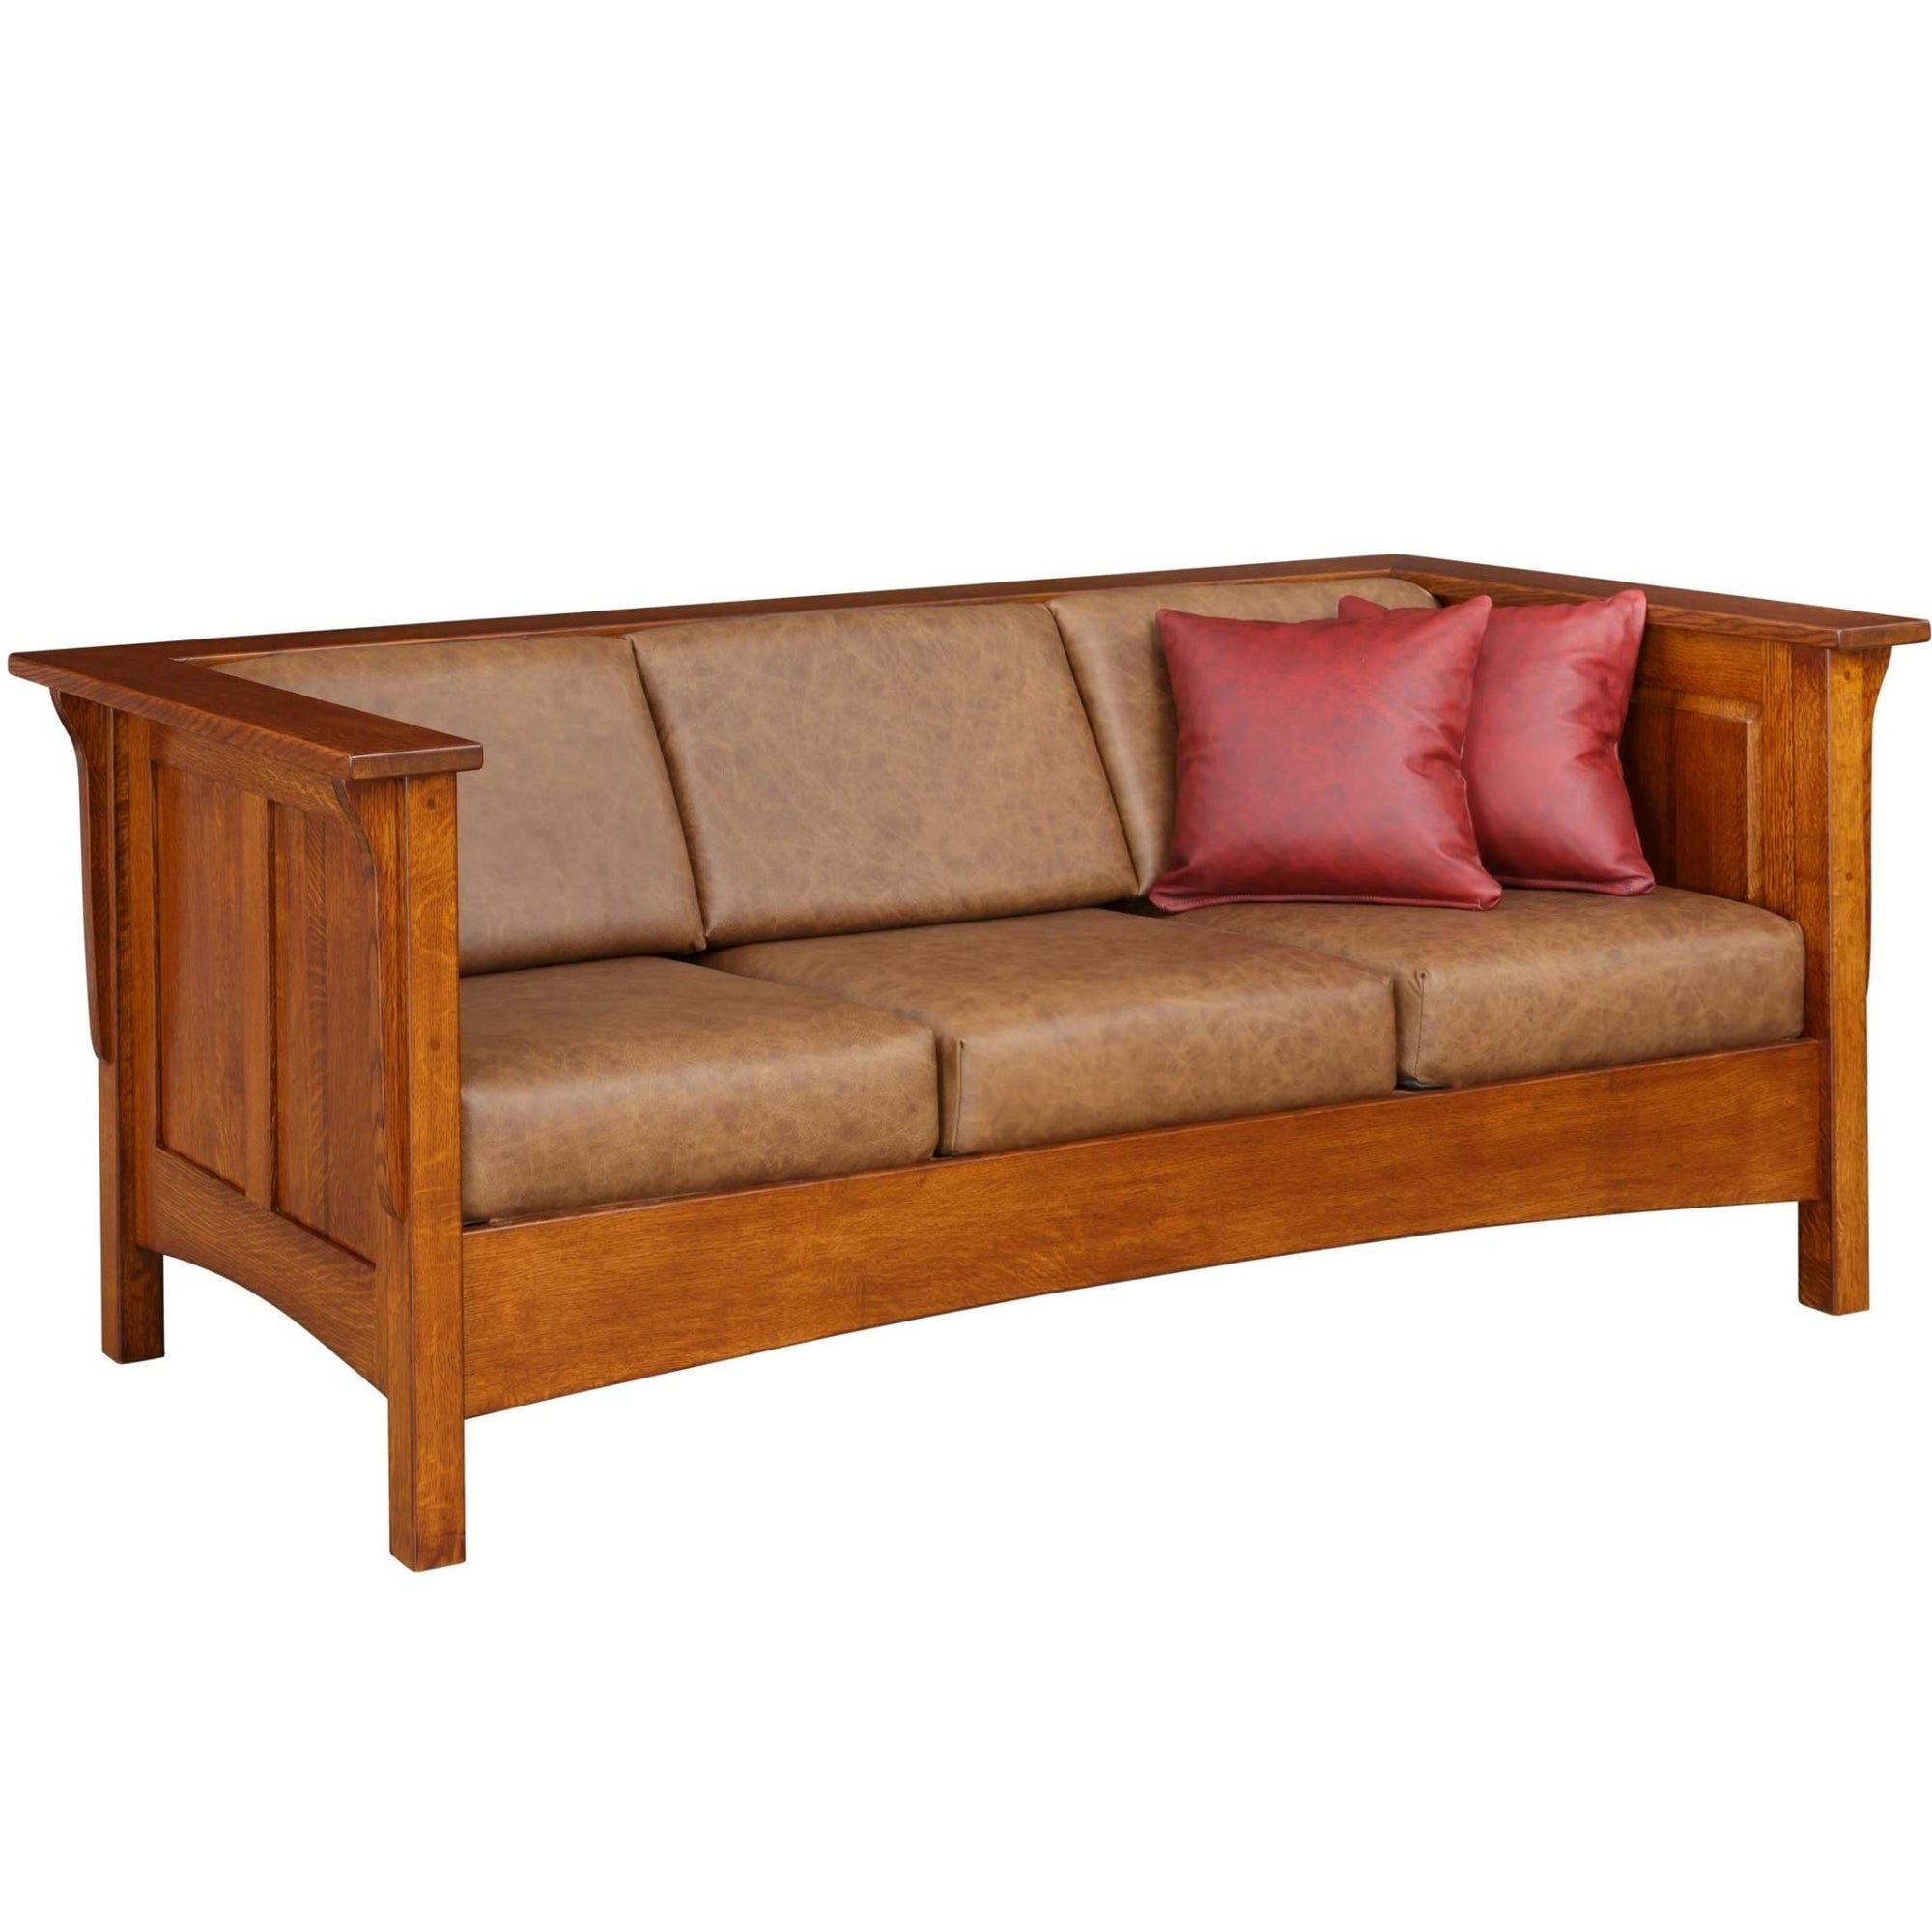 Panel Mission Club Sofa - snyders.furniture